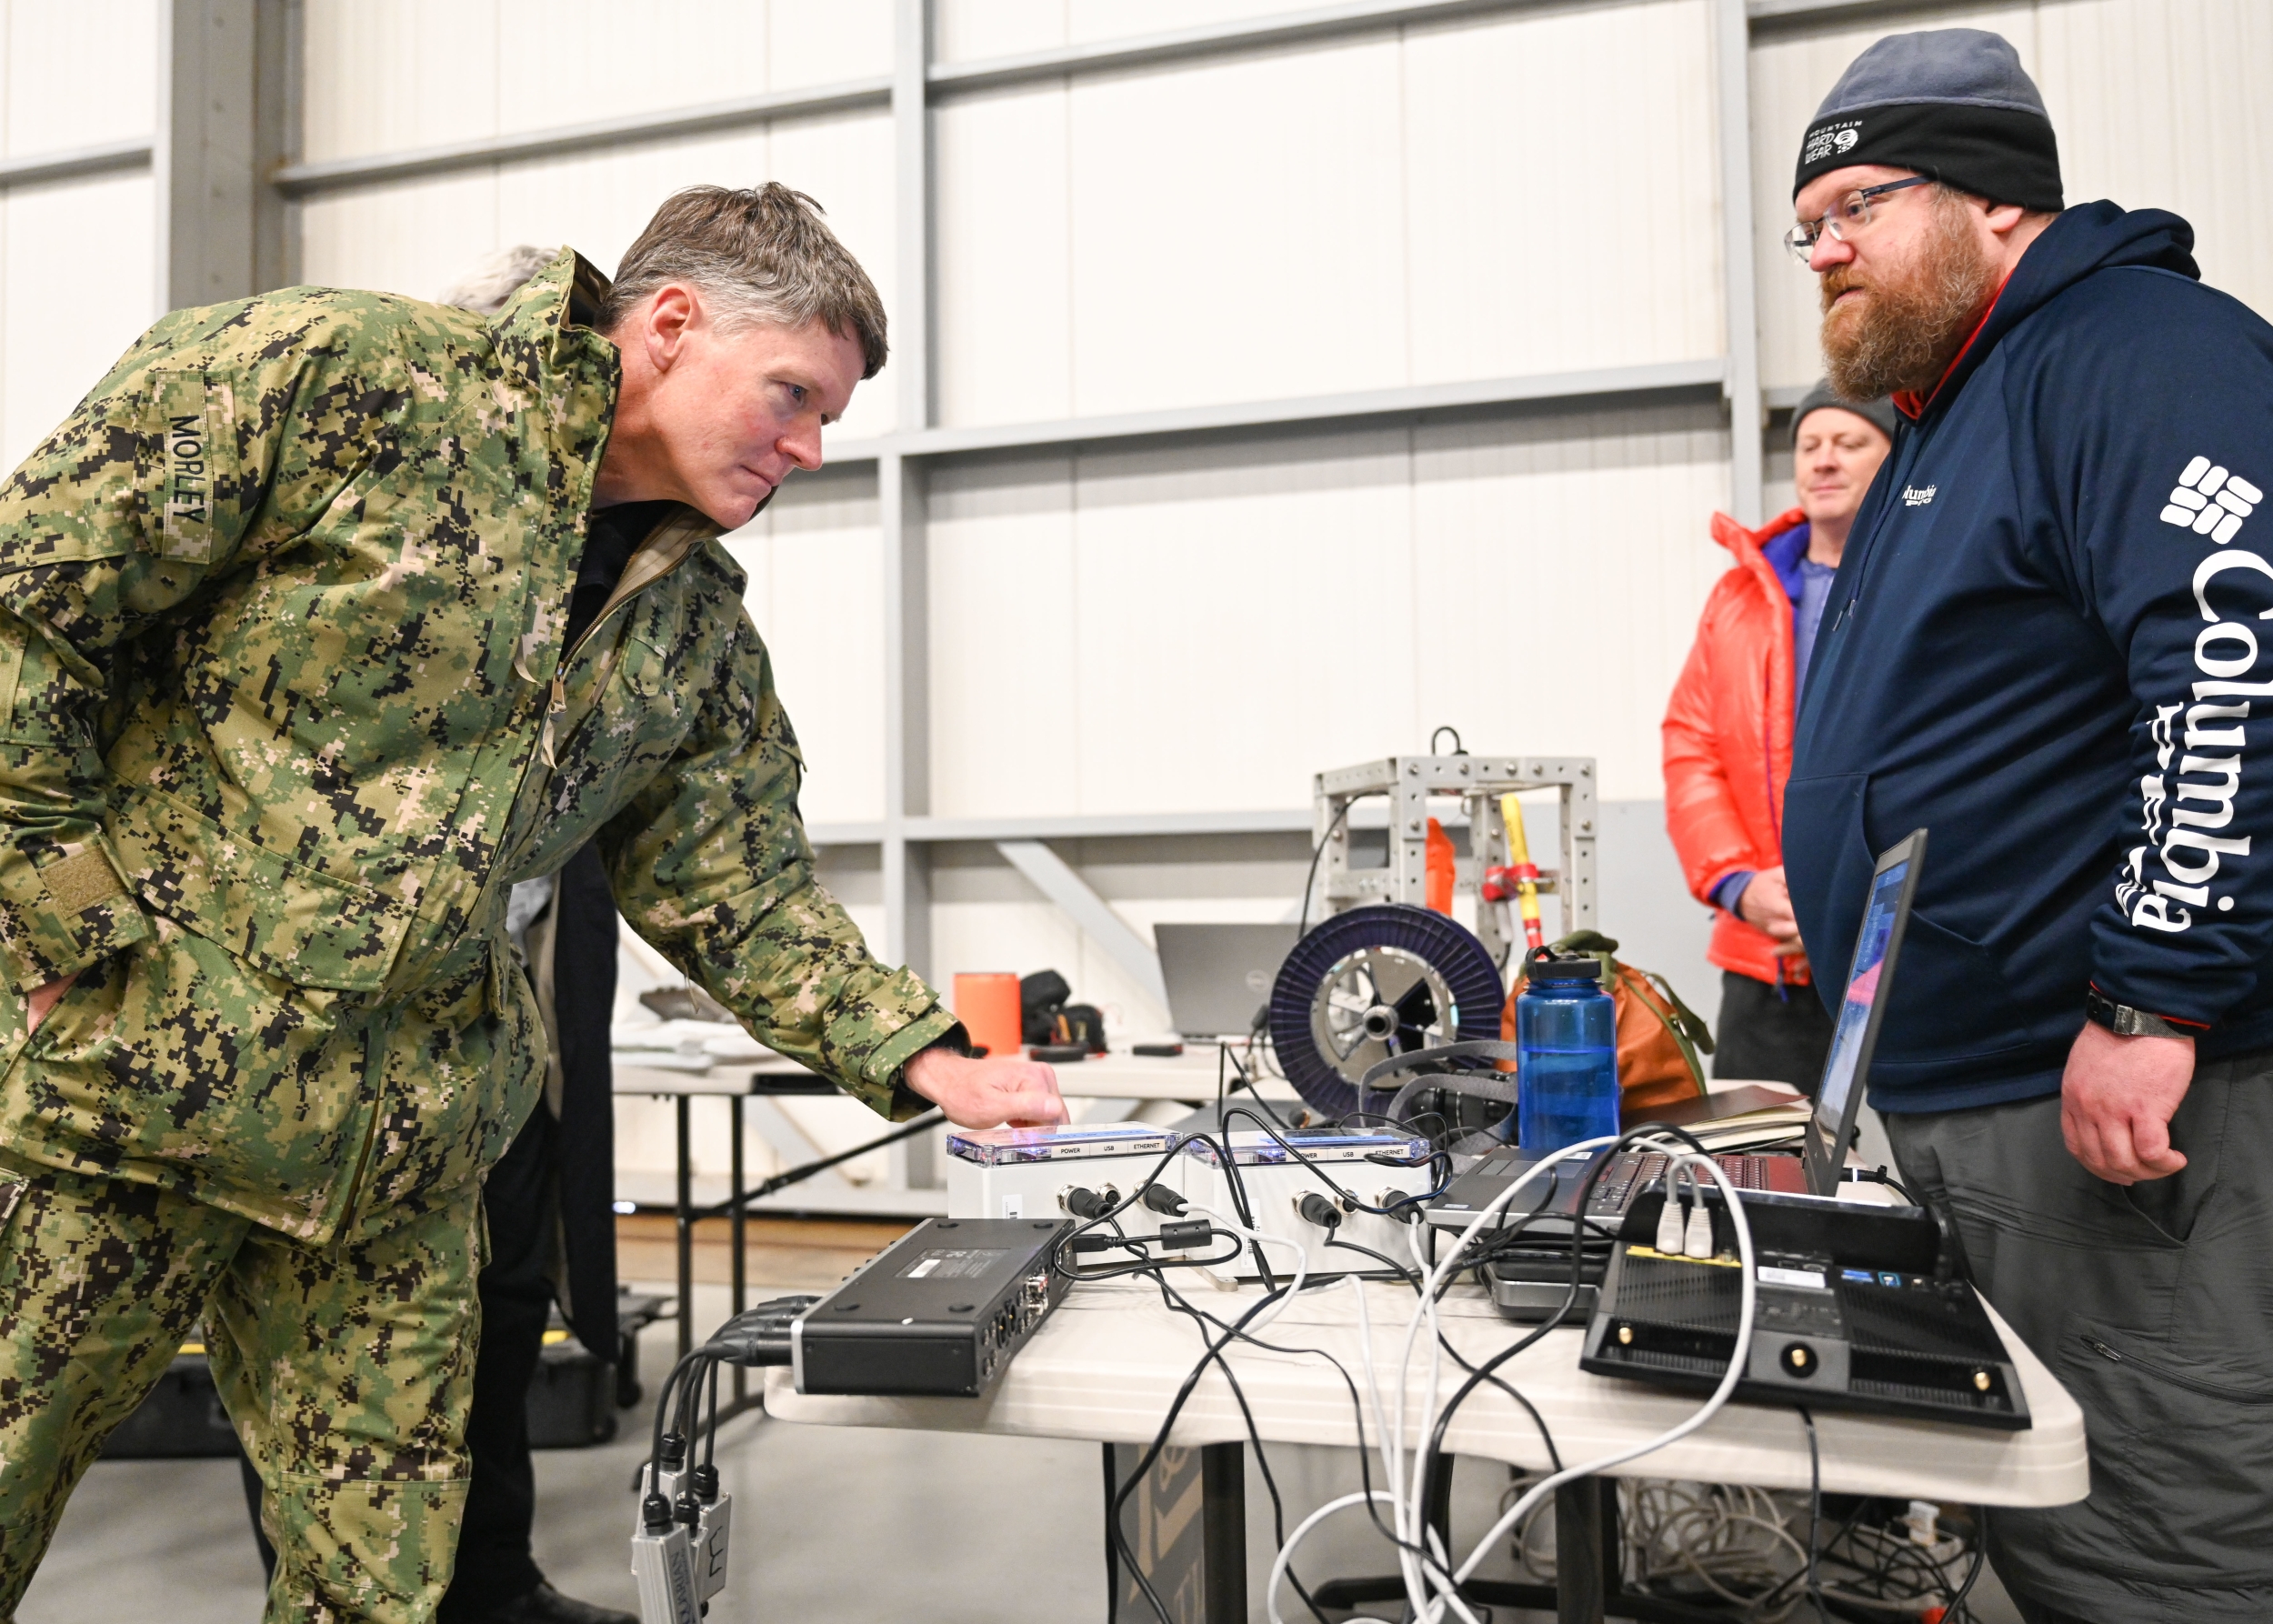 A military official looks at sensors on a table, across from a Lincoln Laboratory researcher. They are in large room, similar to a warehouse setting.  